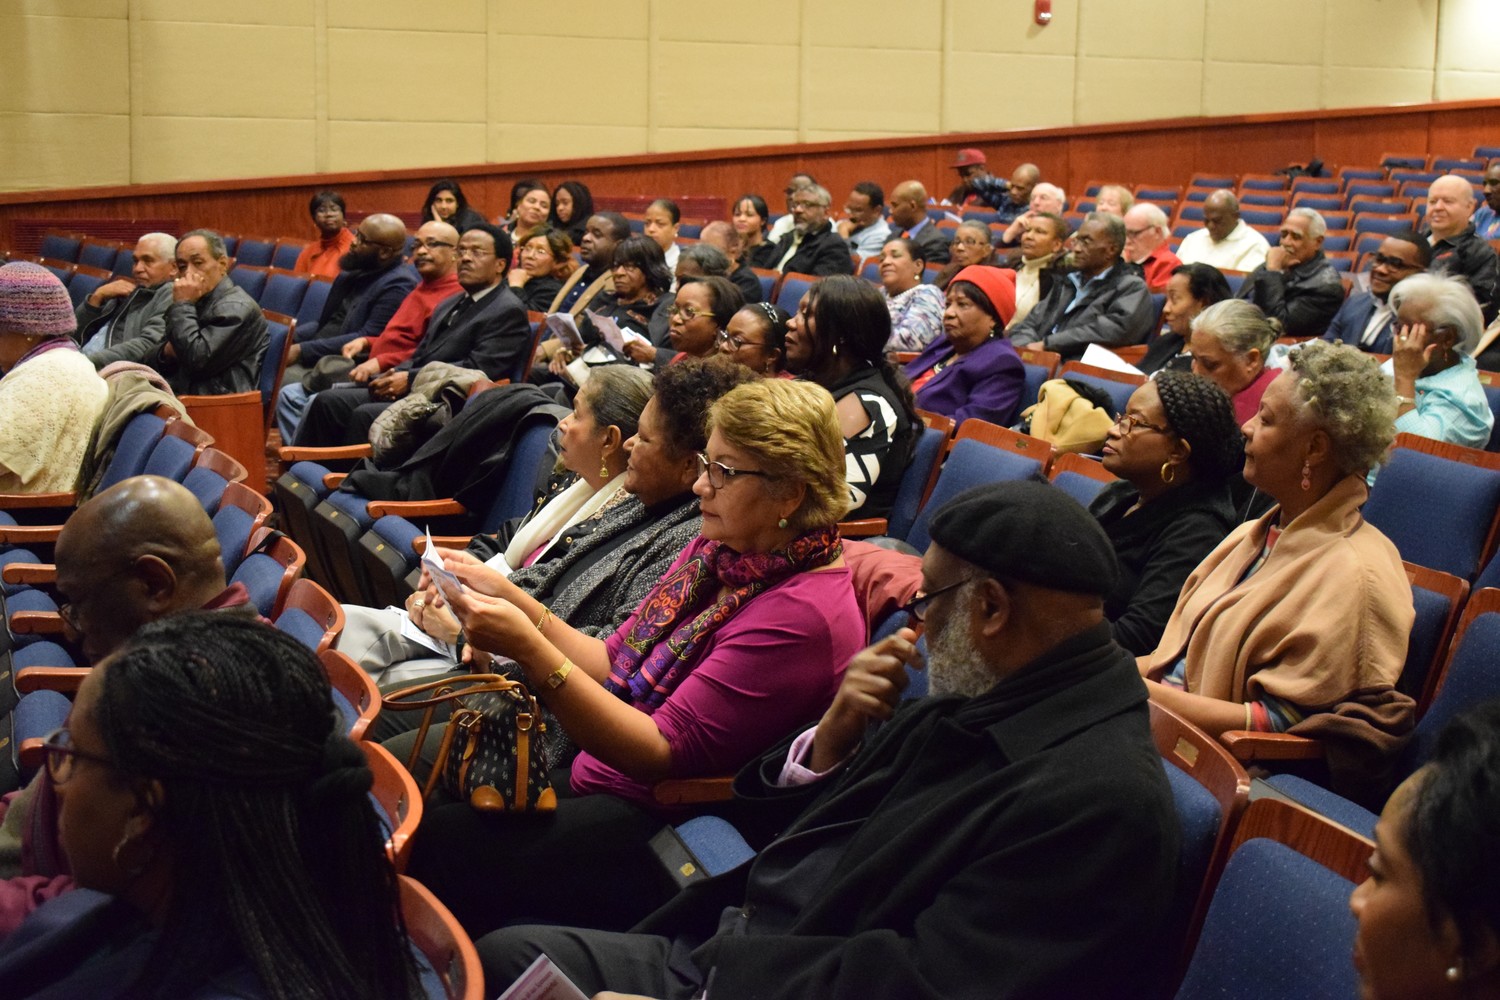 Nassau County residents gathered at the Elmont Memorial Library in February to discuss ways to help Haiti. A recent Department of Homeland Security report, the details of which were obtained through a Freedom of Information request, spoke of persistent hunger and poverty in the Caribbean nation.